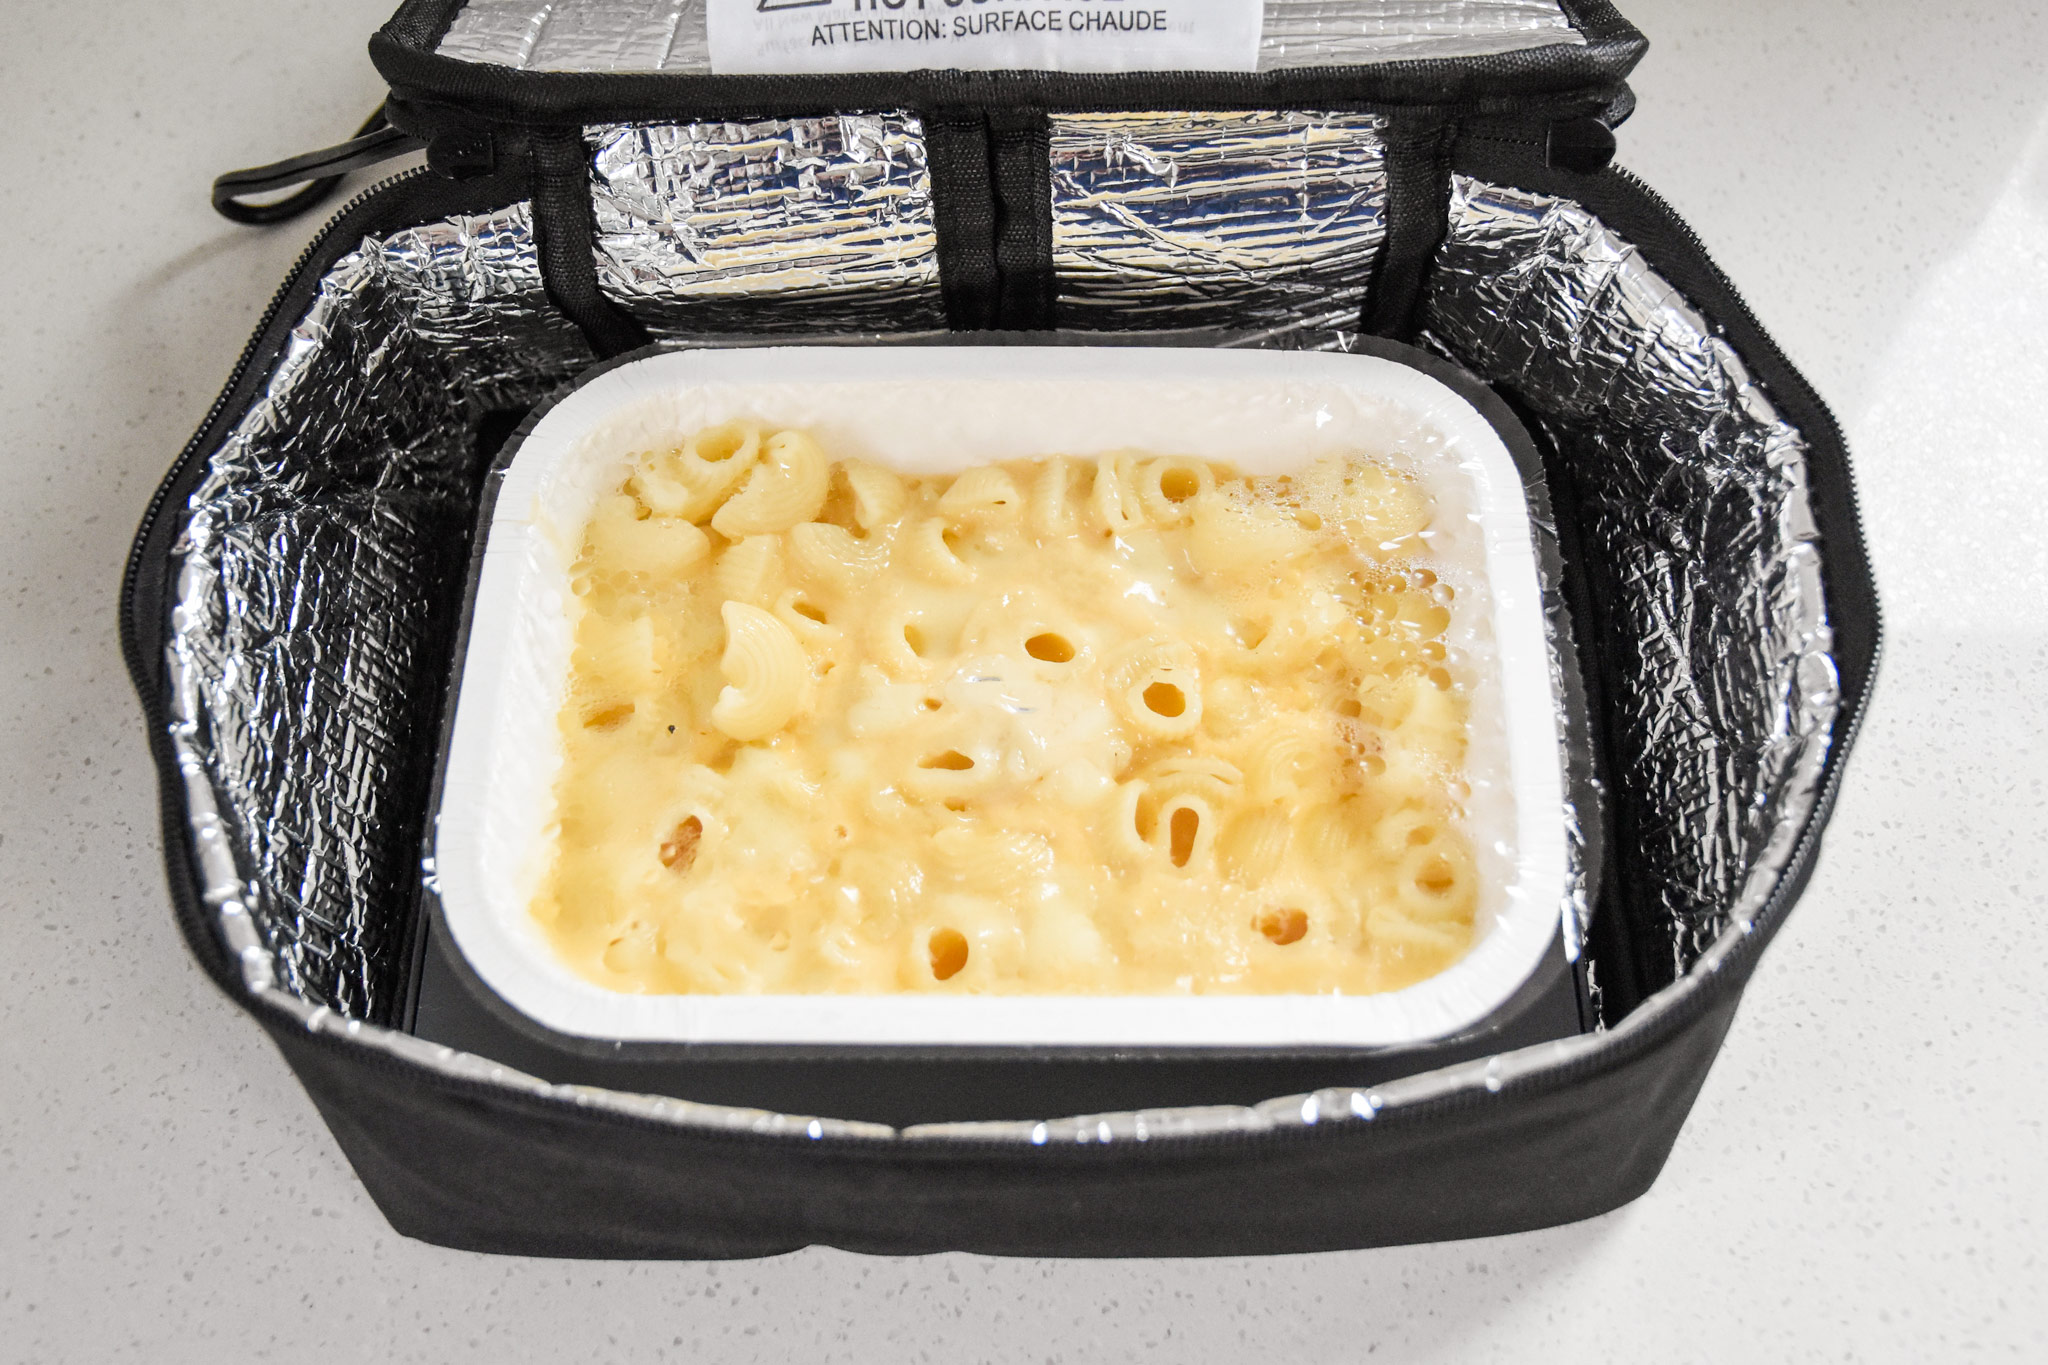 macaroni and cheese meal cooked in the hotlogic mini portable oven.